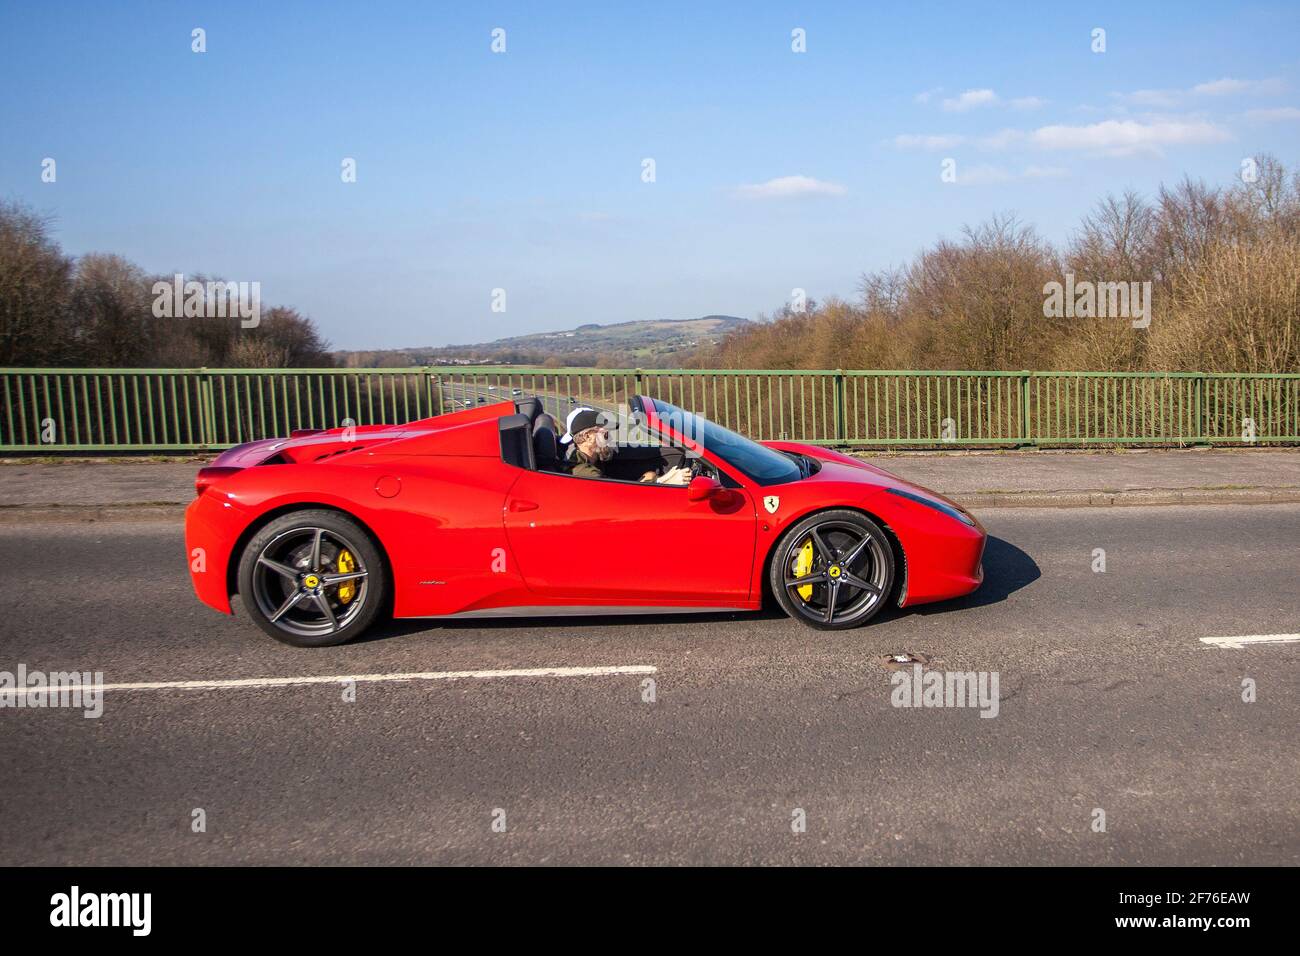 2014 red Ferrari 458 Spider Dct S-A 4497cc; The Ferrari 458 Italia (Type F142) is a mid-engine sports car produced by the Italian automobile manufacturer. Stock Photo